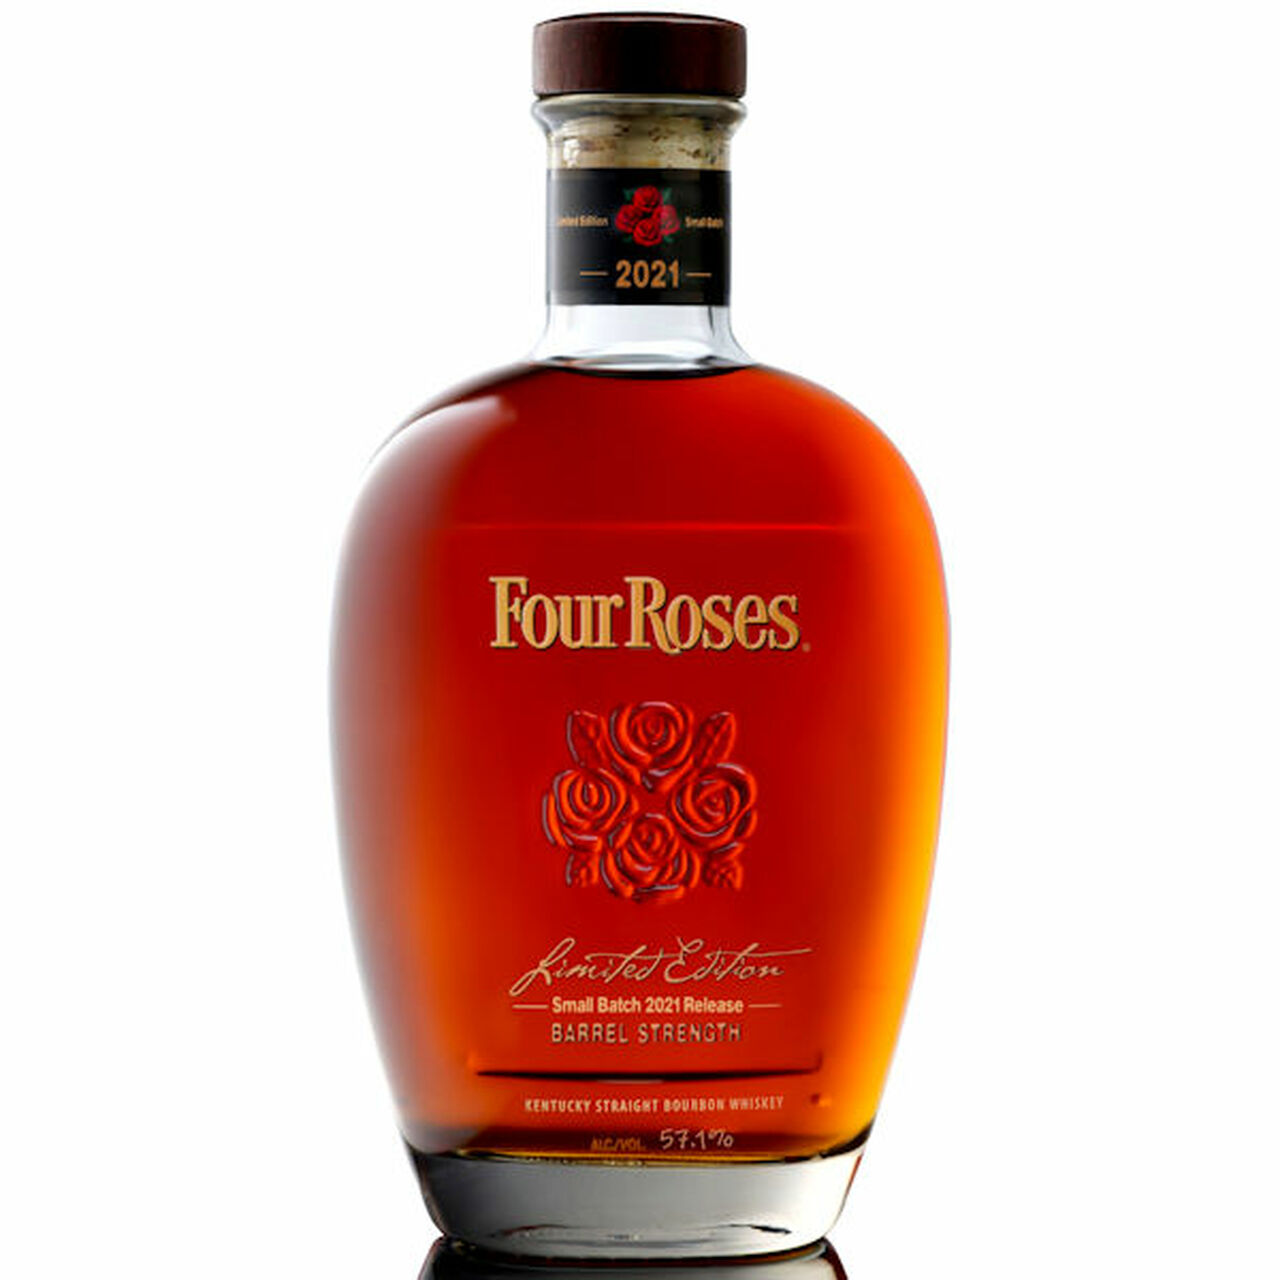 Four Roses Limited Edition Small Batch Bourbon